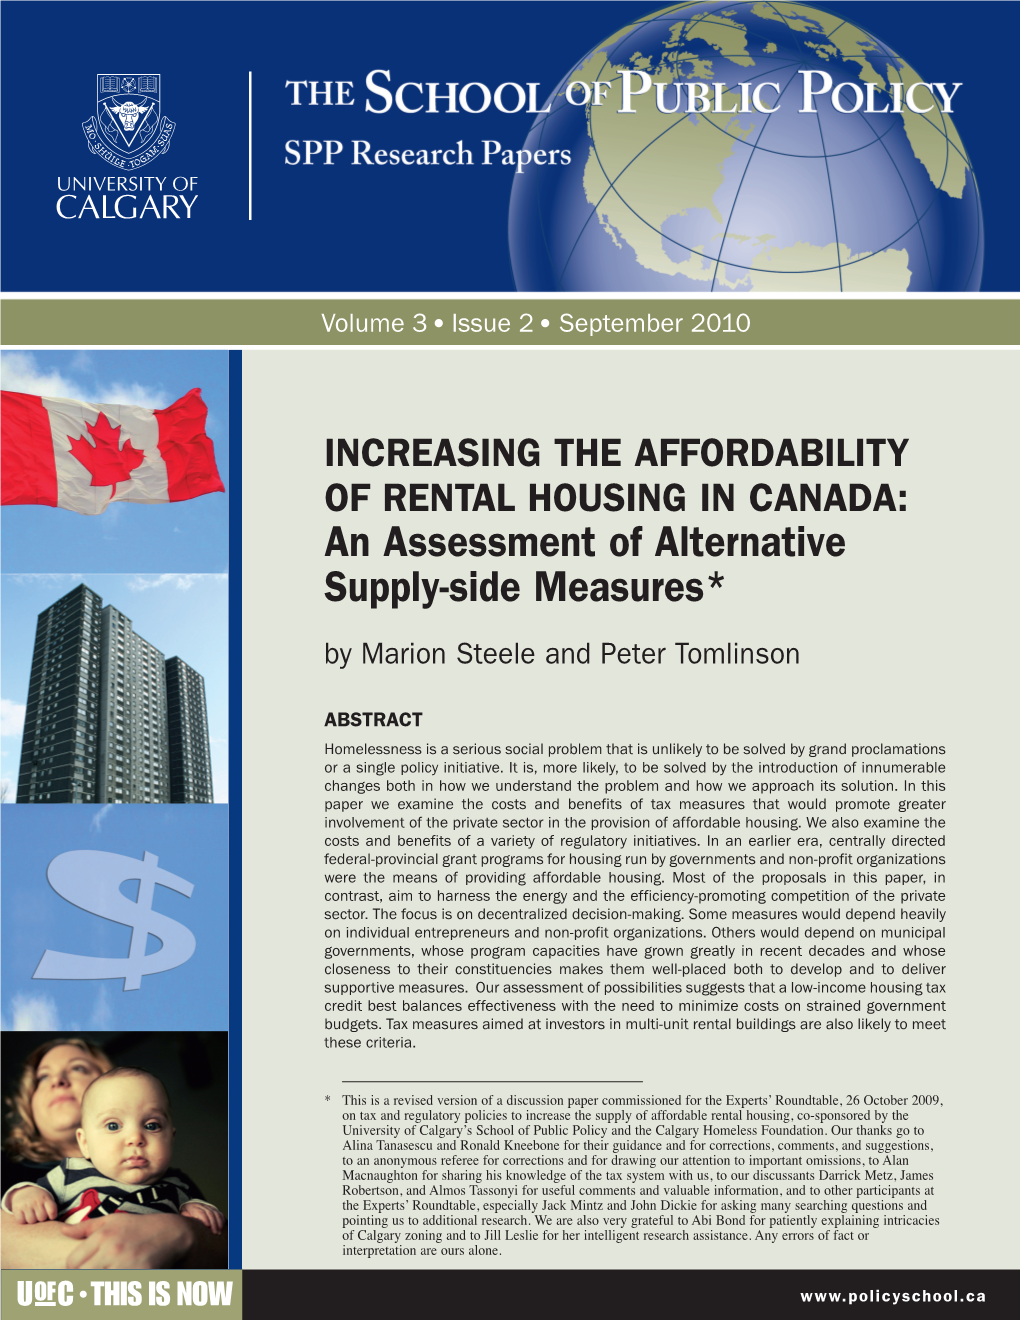 INCREASING the AFFORDABILITY of RENTAL HOUSING in CANADA: an Assessment of Alternative Supply-Side Measures* by Marion Steele and Peter Tomlinson